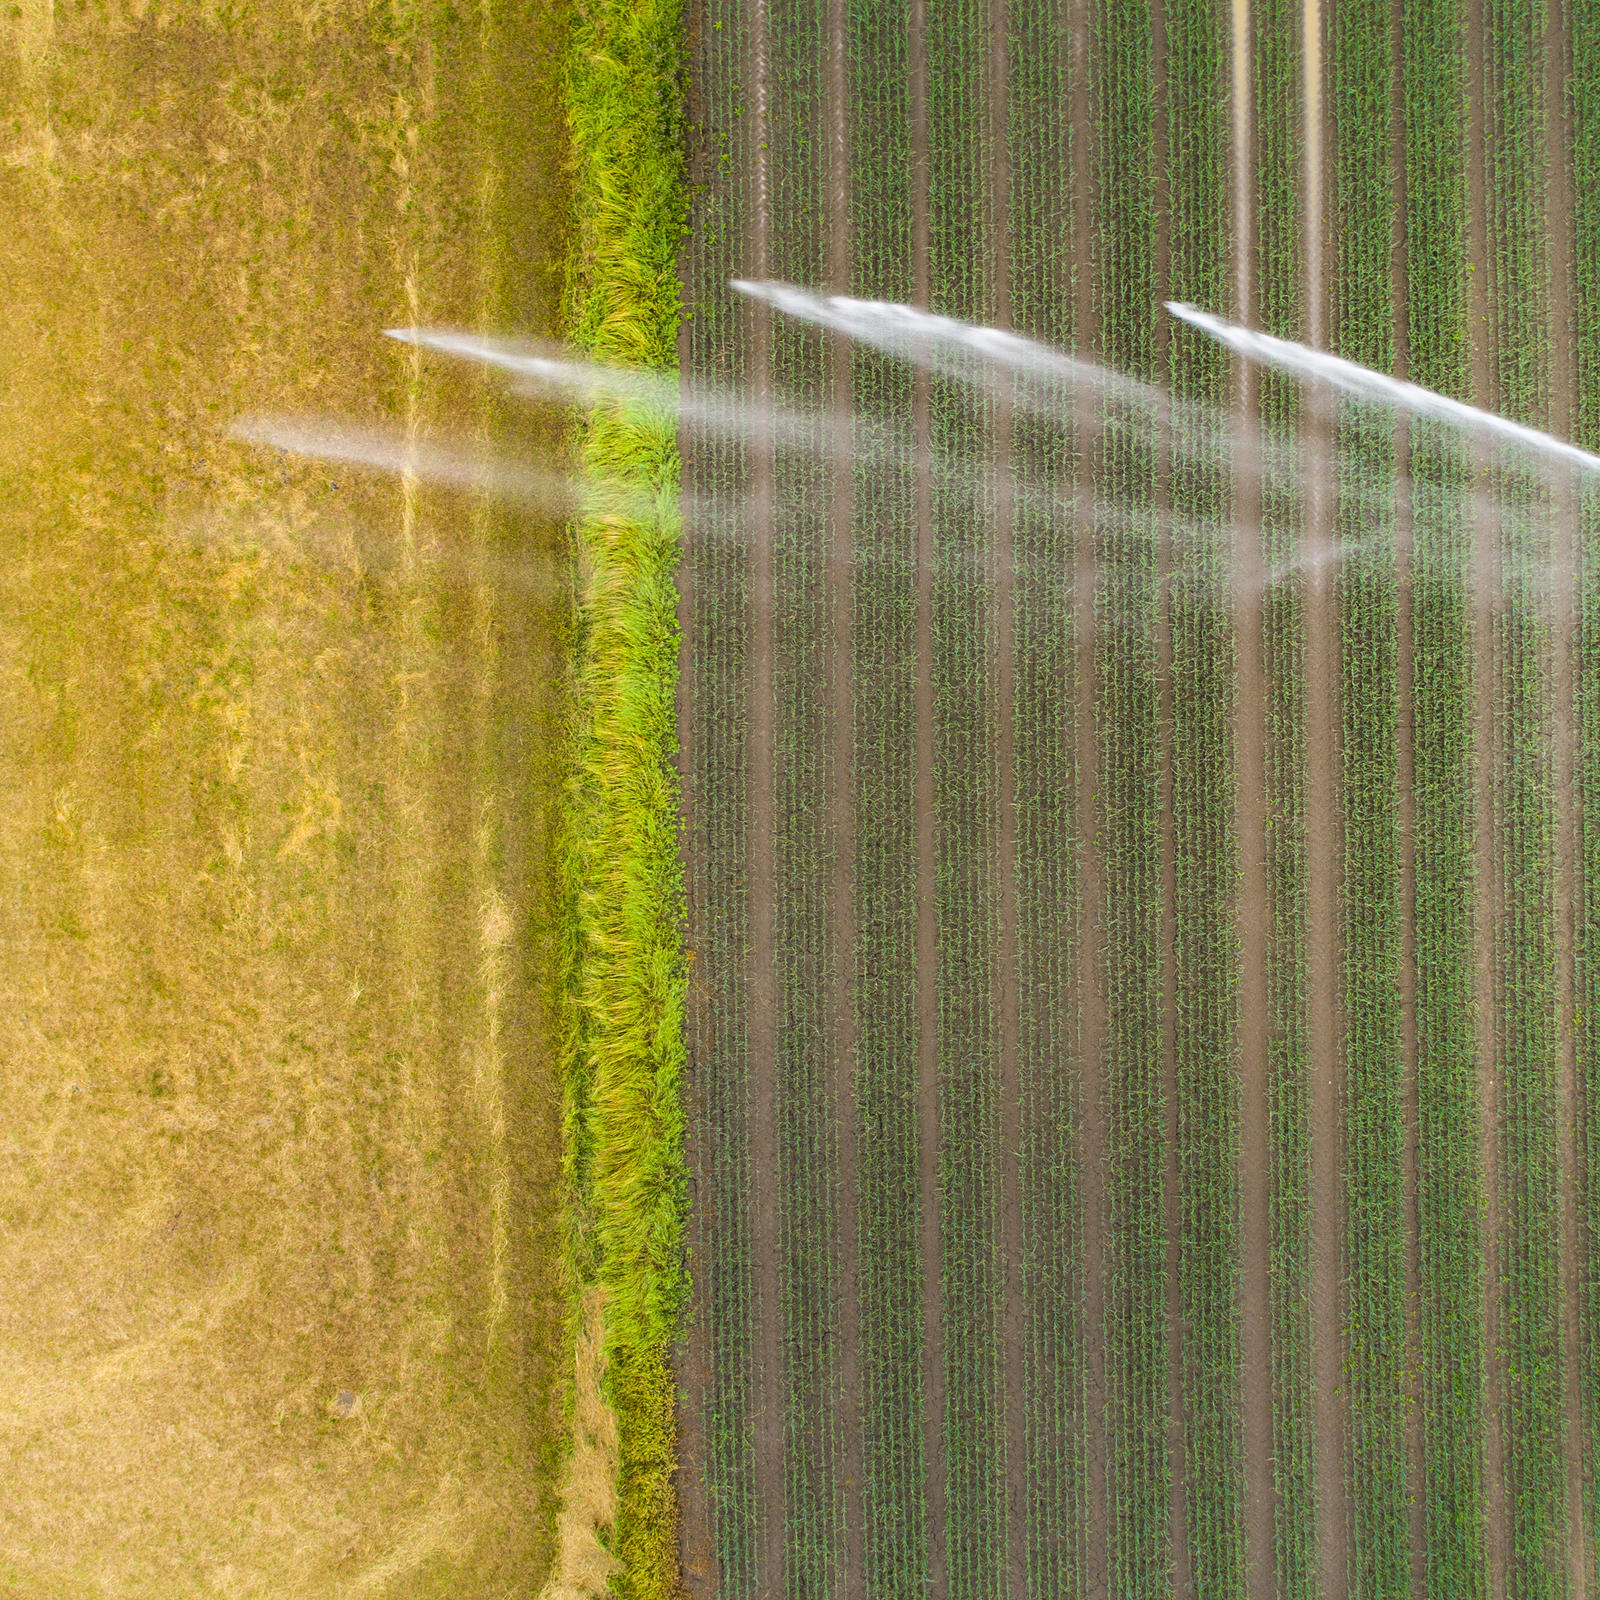 AI Institute for Transforming Workforce graphic - sprinkler on wheat fields